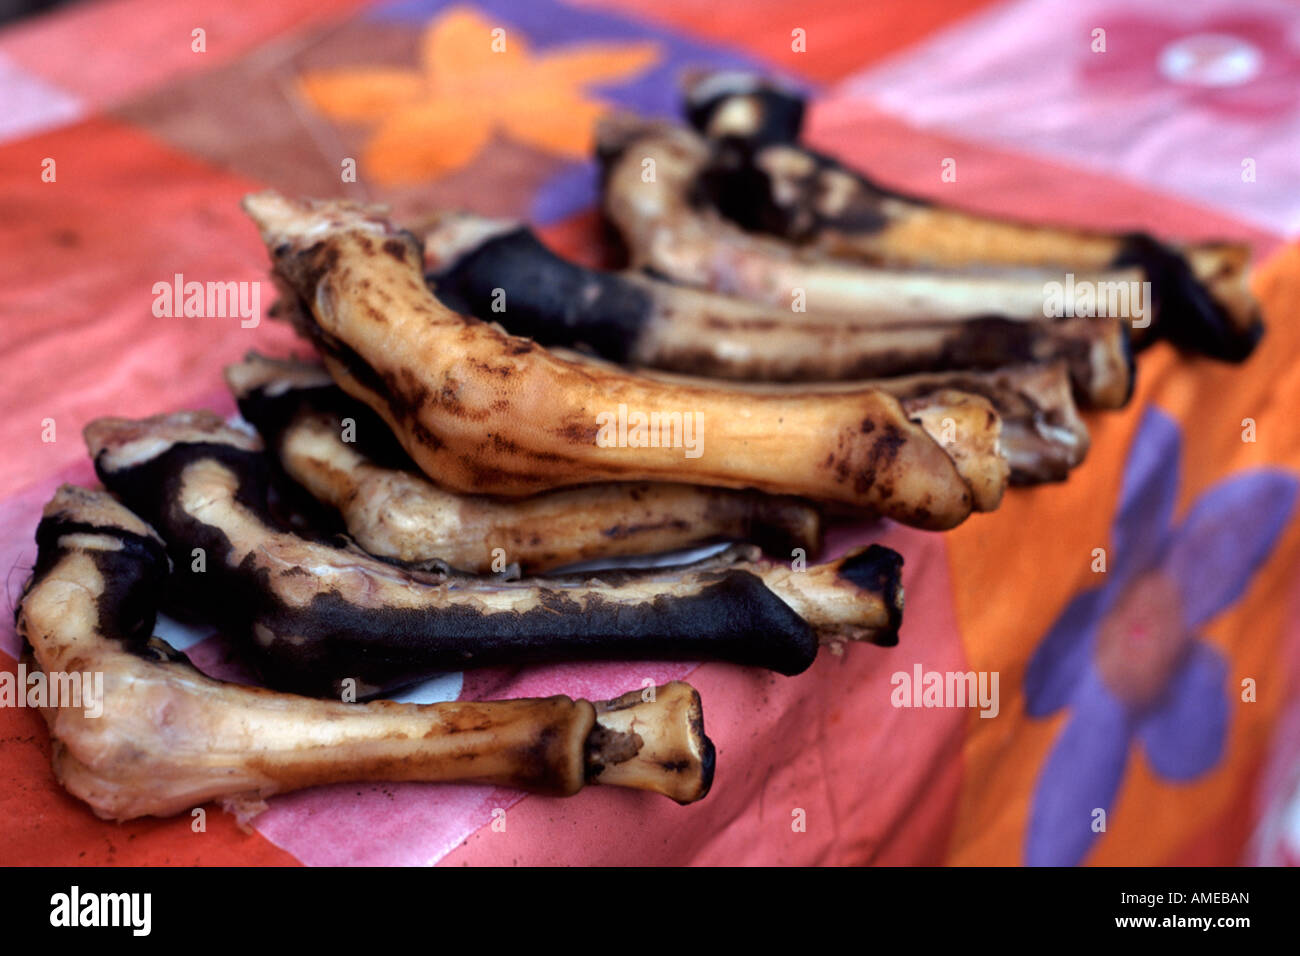 Unidentified animal legs for sale in the market in Marrakech, Morocco. Stock Photo